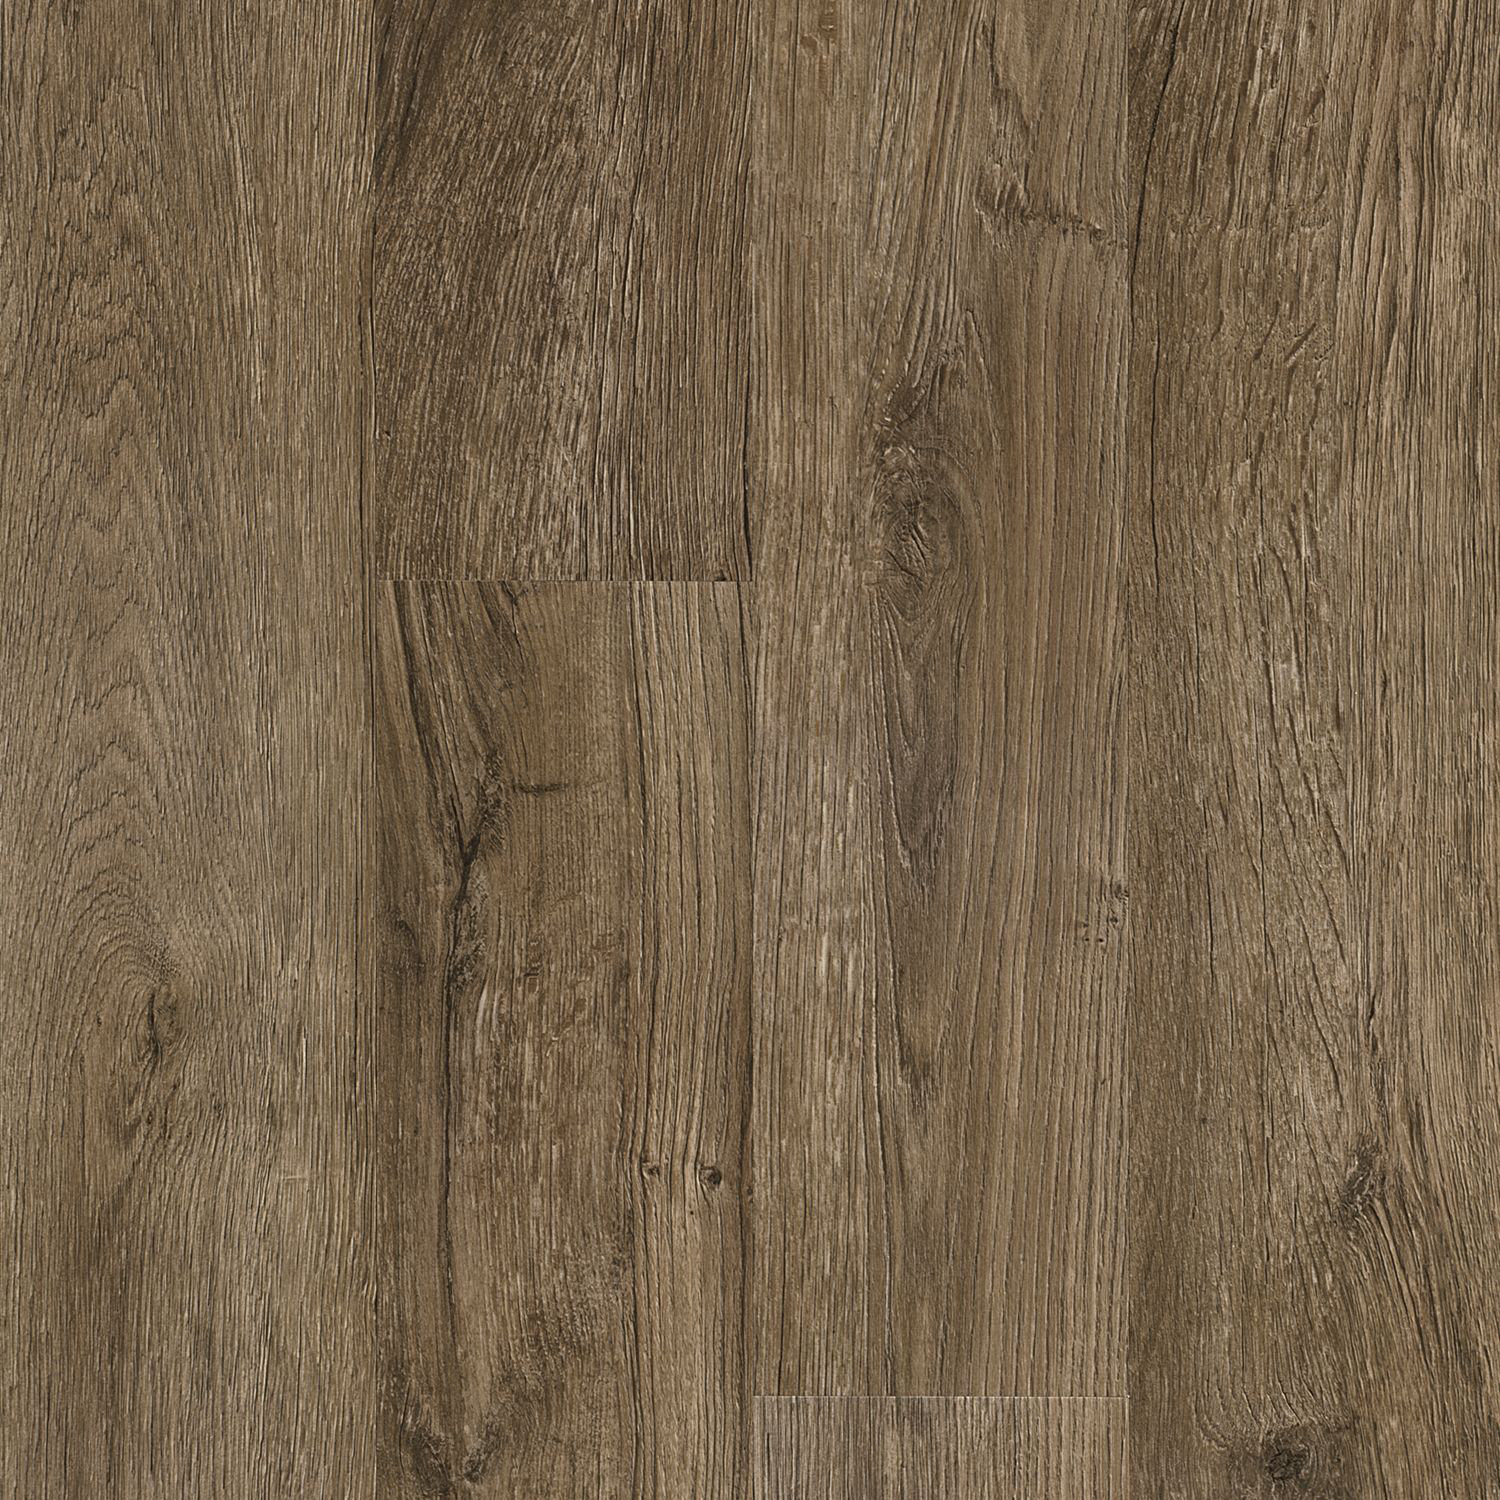 Armstrong American Home Bistro Brown 6 In X 36 In Glue Down Vinyl Plank 35 95 Sq Ft Carton U507165p The Home Depot Luxury Flooring Best Flooring For Basement Basement Flooring Options